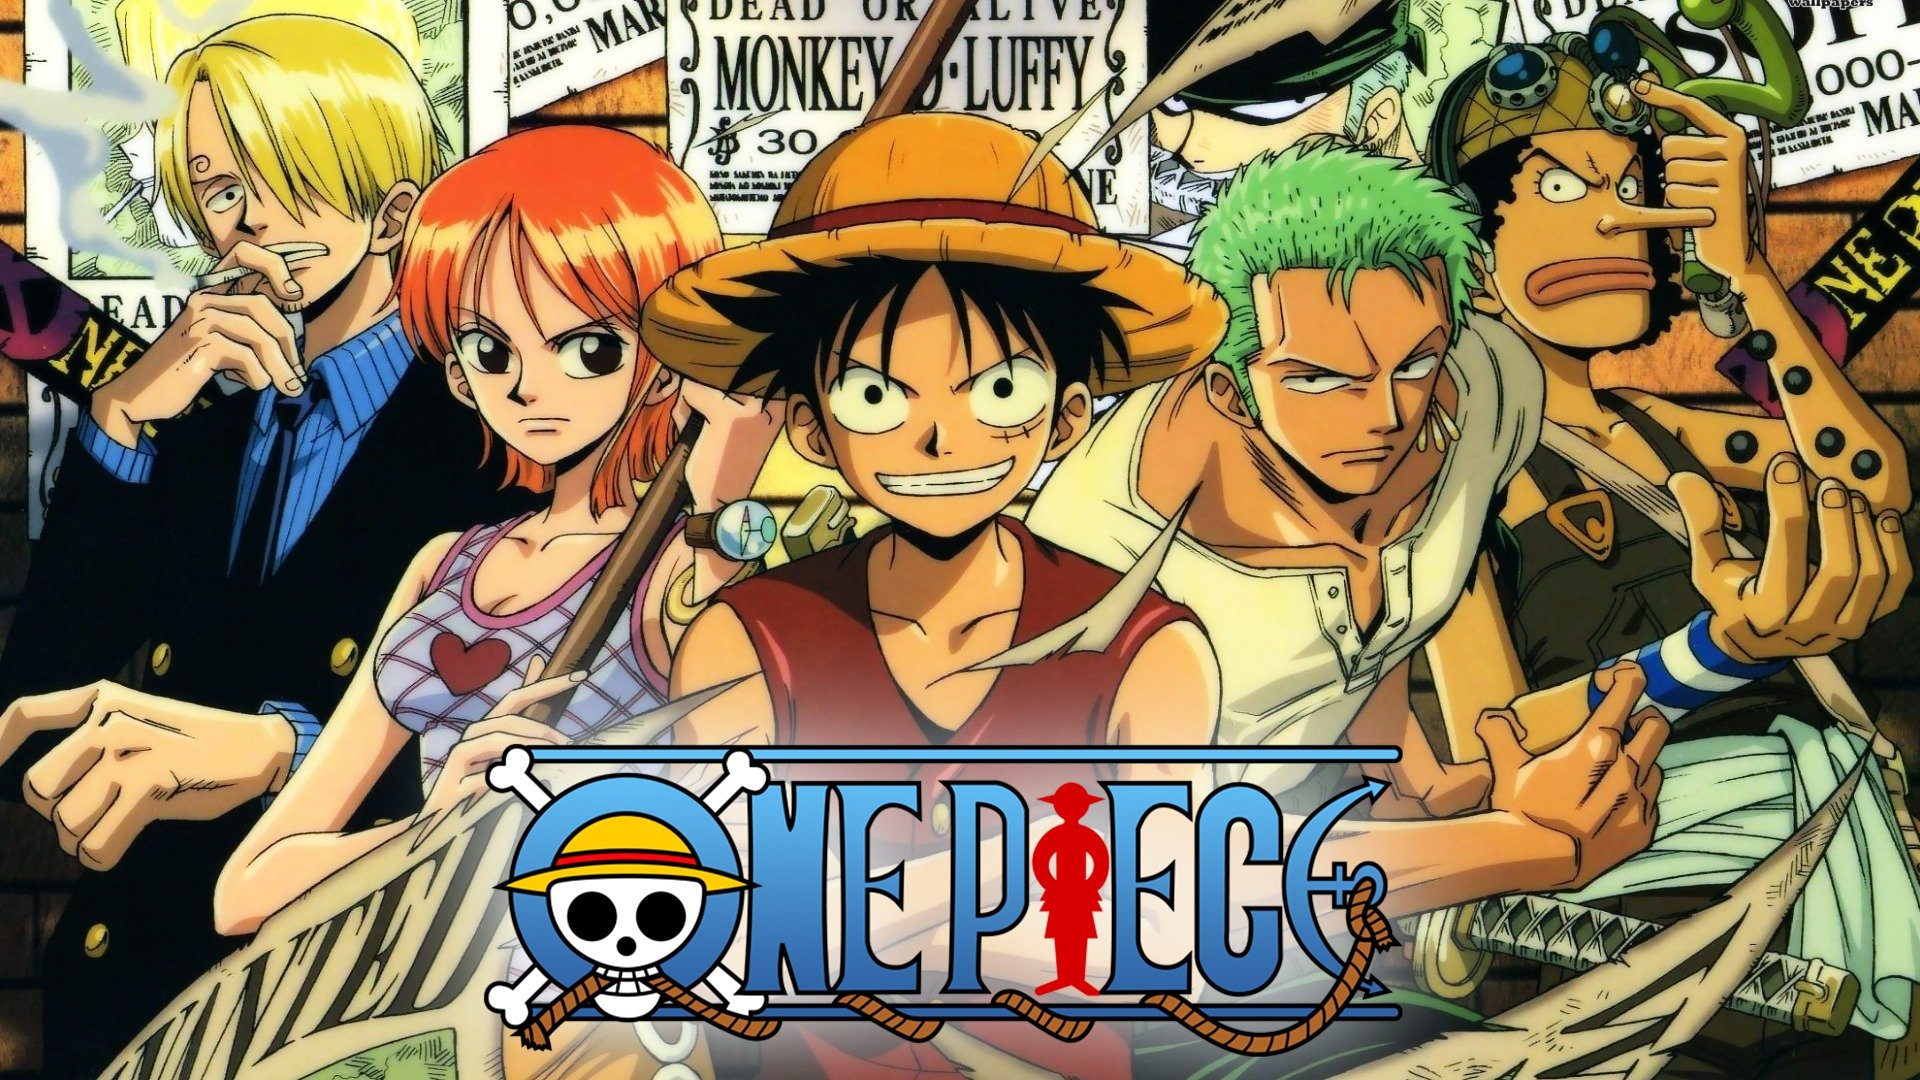 One Piece Luffy Gear 5 Episode: Release Date and Trailer Revealed